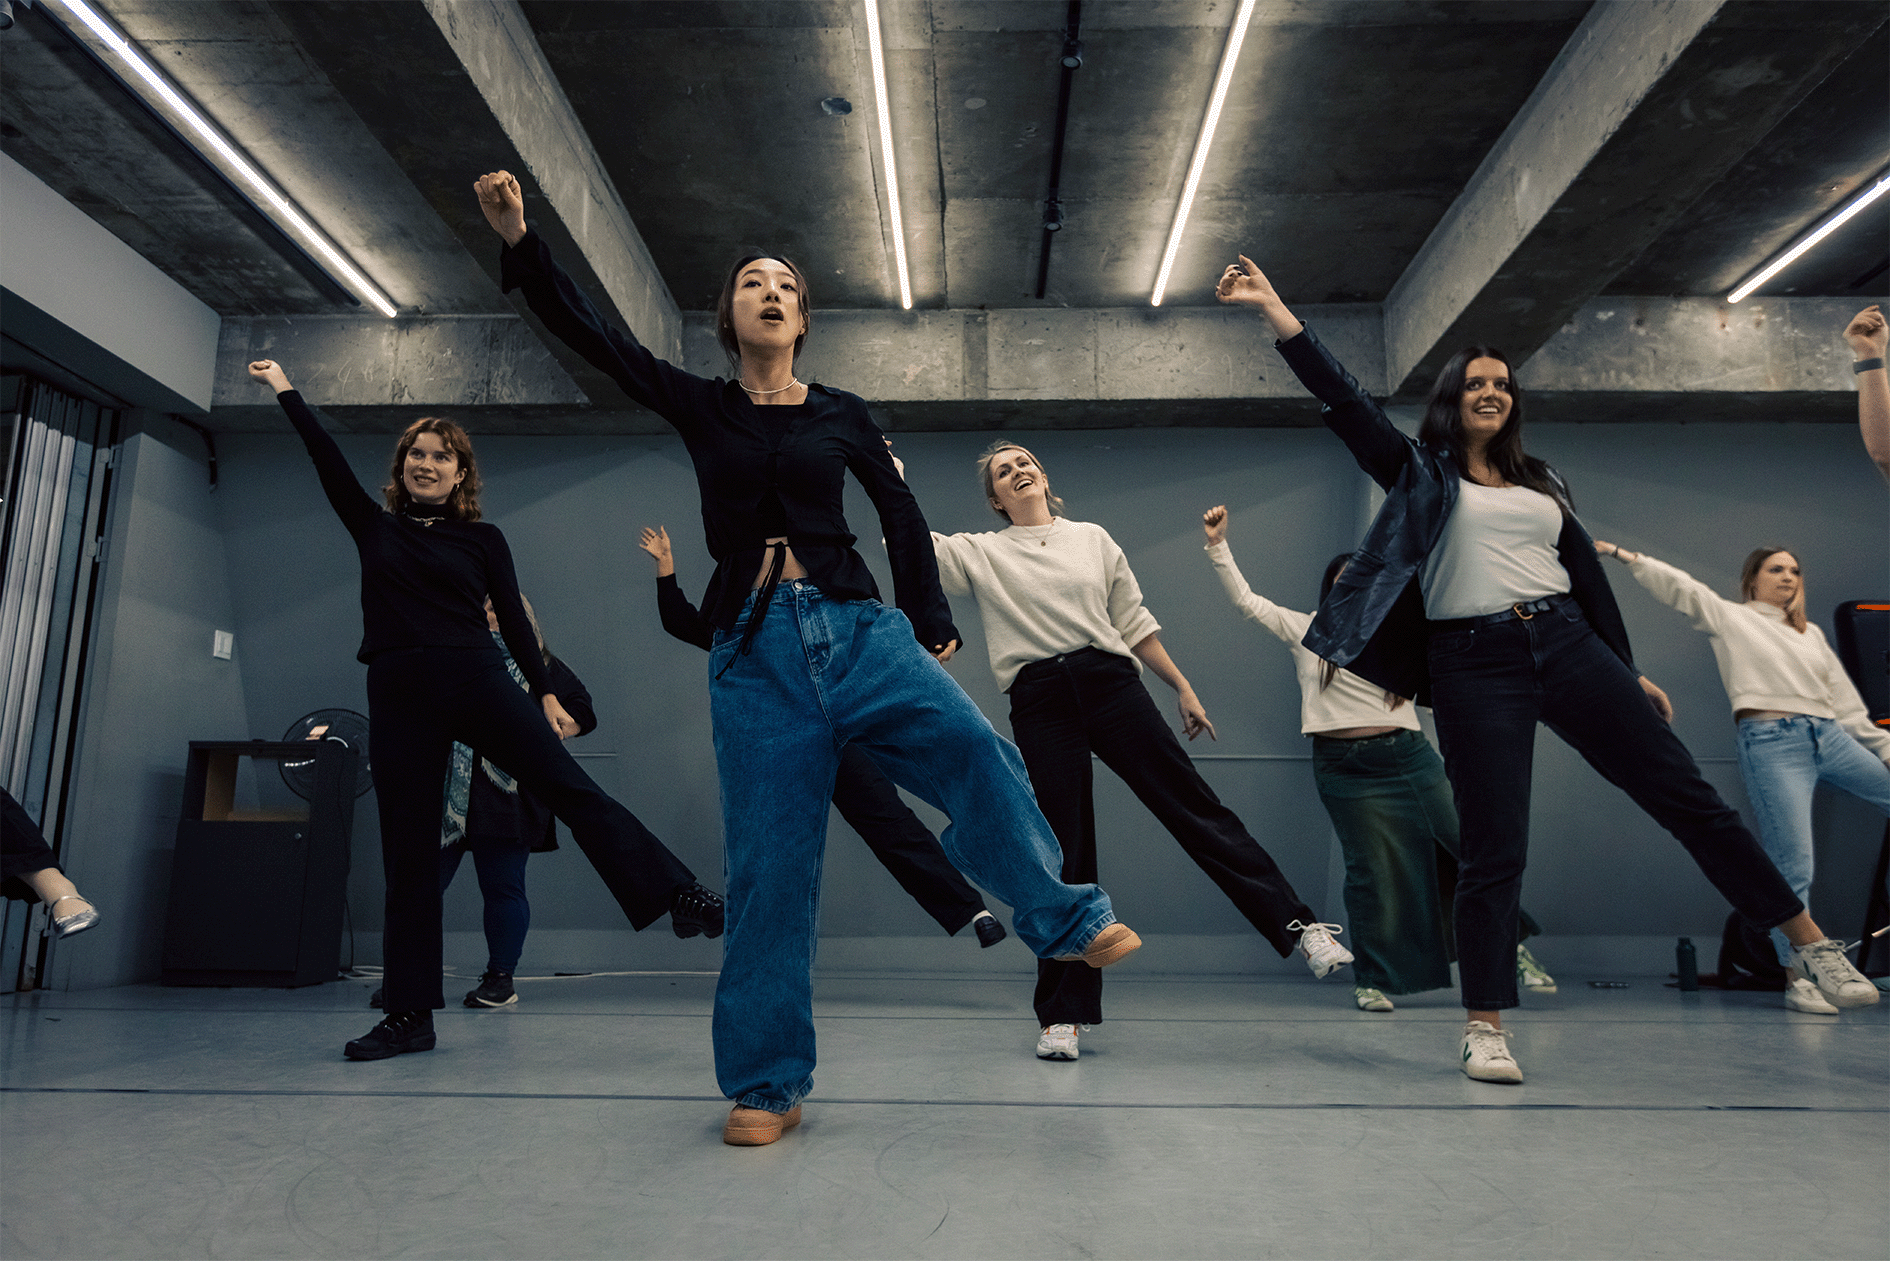 Group of people practicing a dance routine in a studio setting